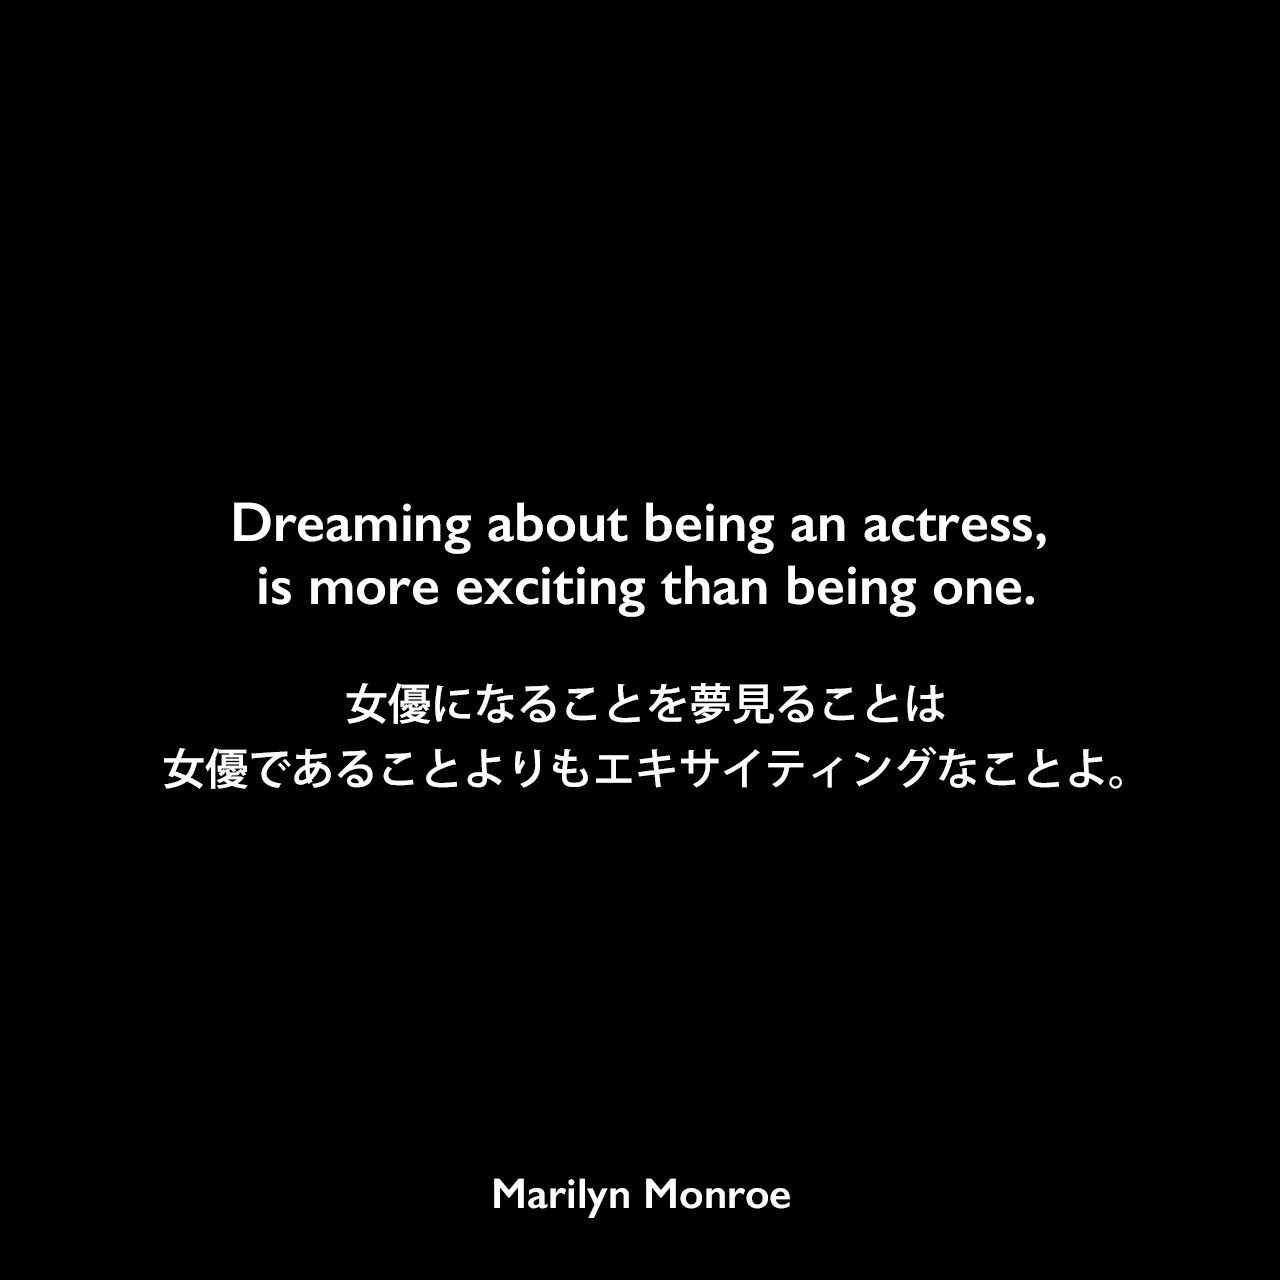 Dreaming about being an actress, is more exciting than being one.女優になることを夢見ることは、女優であることよりもエキサイティングなことよ。Marilyn Monroe